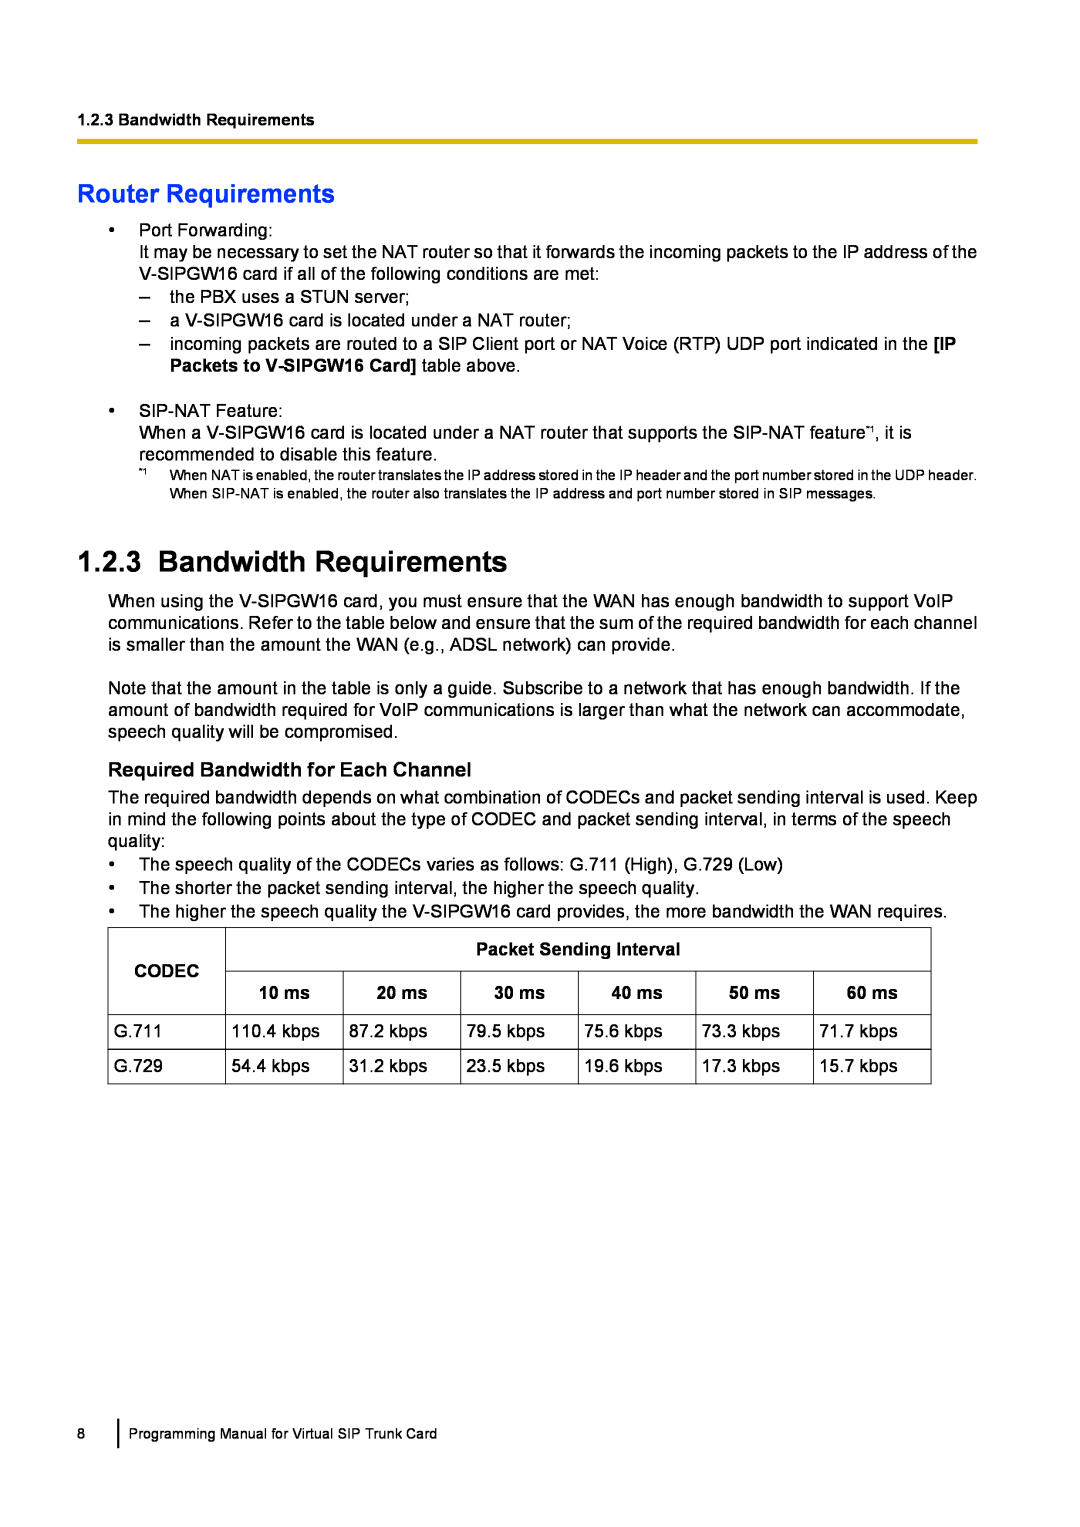 Panasonic KX-TDE100 manual Bandwidth Requirements, Router Requirements, Codec, Packet Sending Interval, 10 ms, 20 ms, 30 ms 